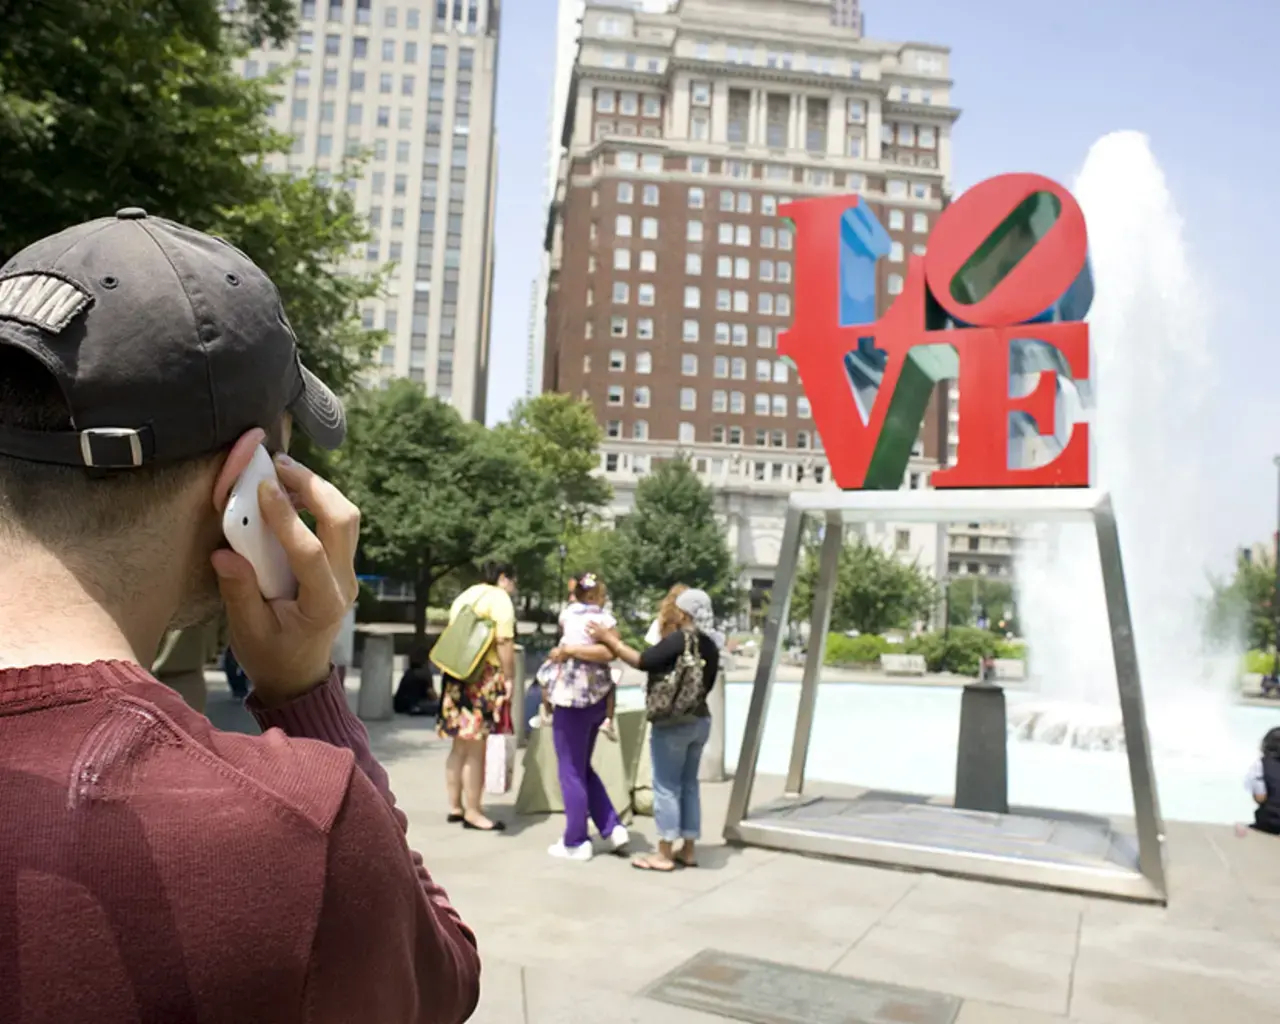 The Association for Public Art&#39;s Museum Without Walls AUDIO&nbsp;launch event at Philadelphia&#39;s LOVE Park, June 10, 2010. Pictured: Robert Indiana, LOVE, 1976. Photo by Albert Yee.&nbsp;